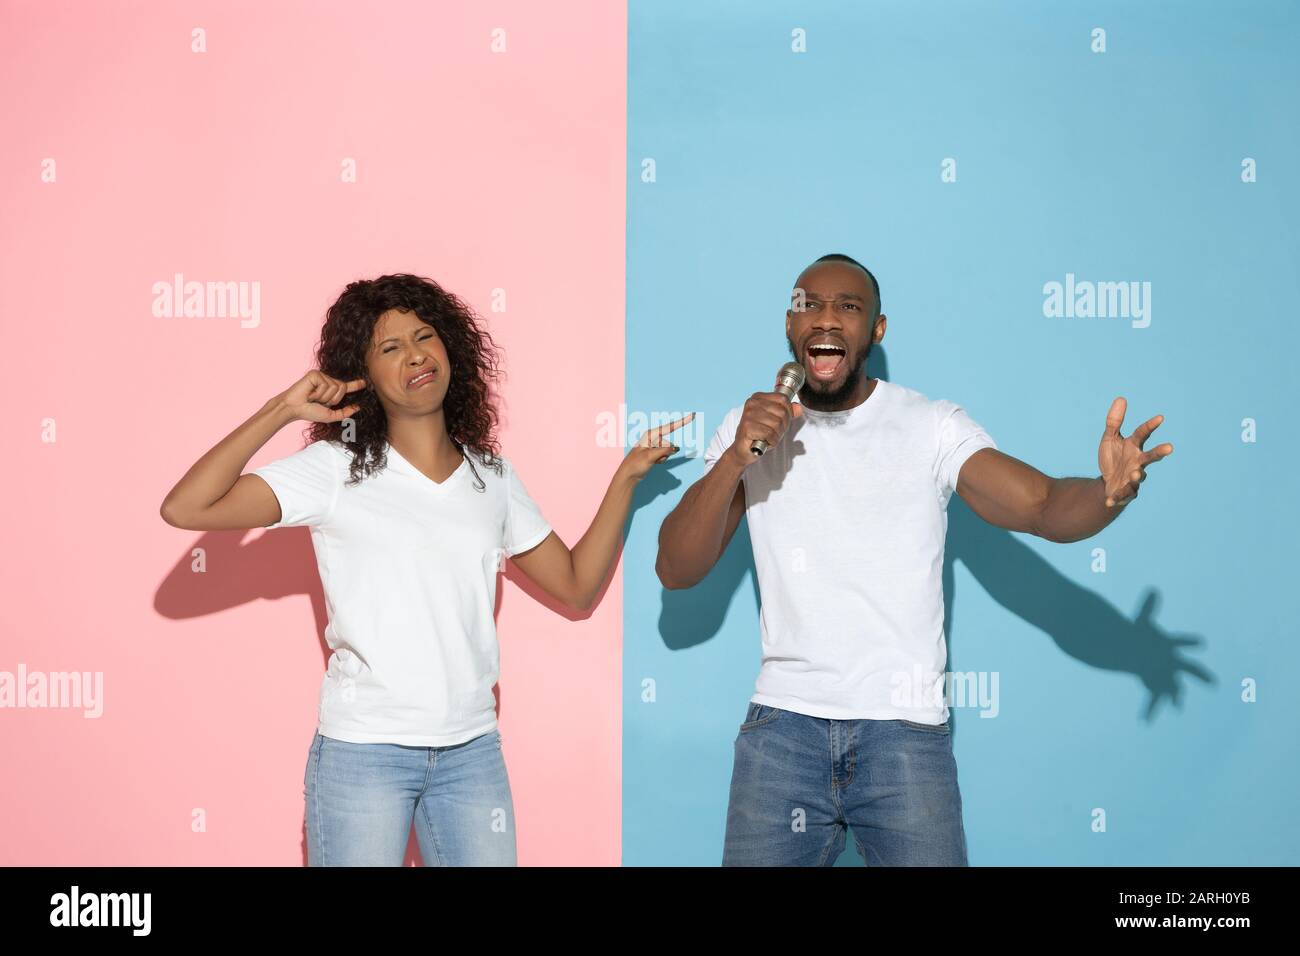 He singing, she angry. Young man and woman in casual clothes on pink, blue bicolored background. Concept of human emotions, facial expession, relations, ad. Beautiful african-american couple. Stock Photo